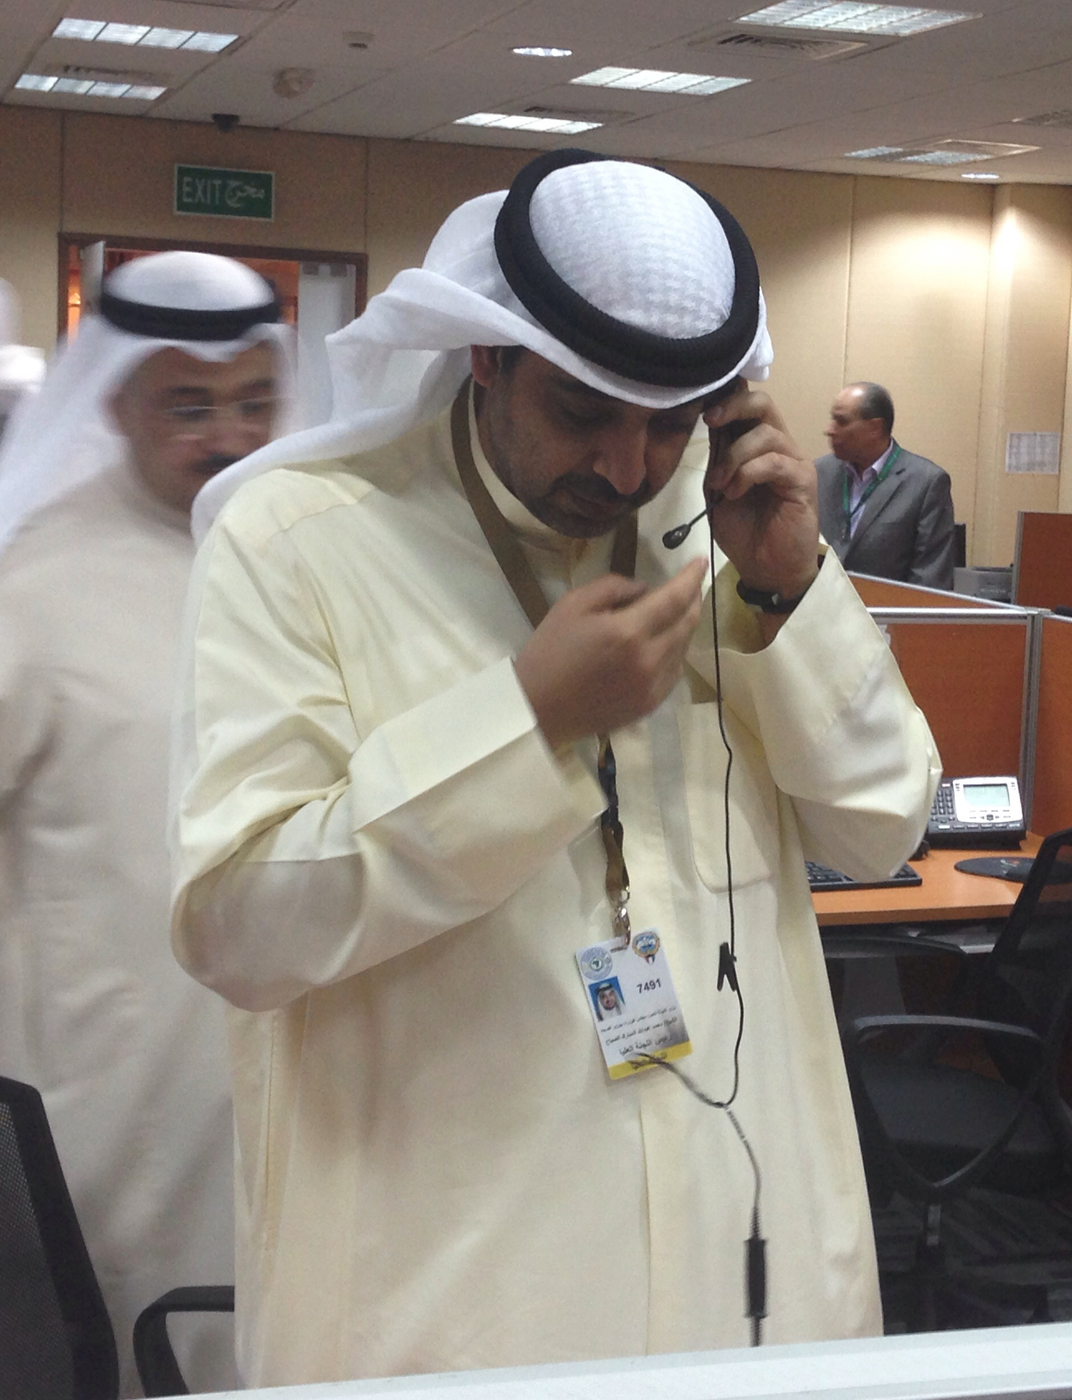 Minister of State for Cabinet Affairs and Minister of Health Sheikh Mohammad Abdullah Al-Mubarak Al-Sabah during a visit to the Health Ministry's Call Center